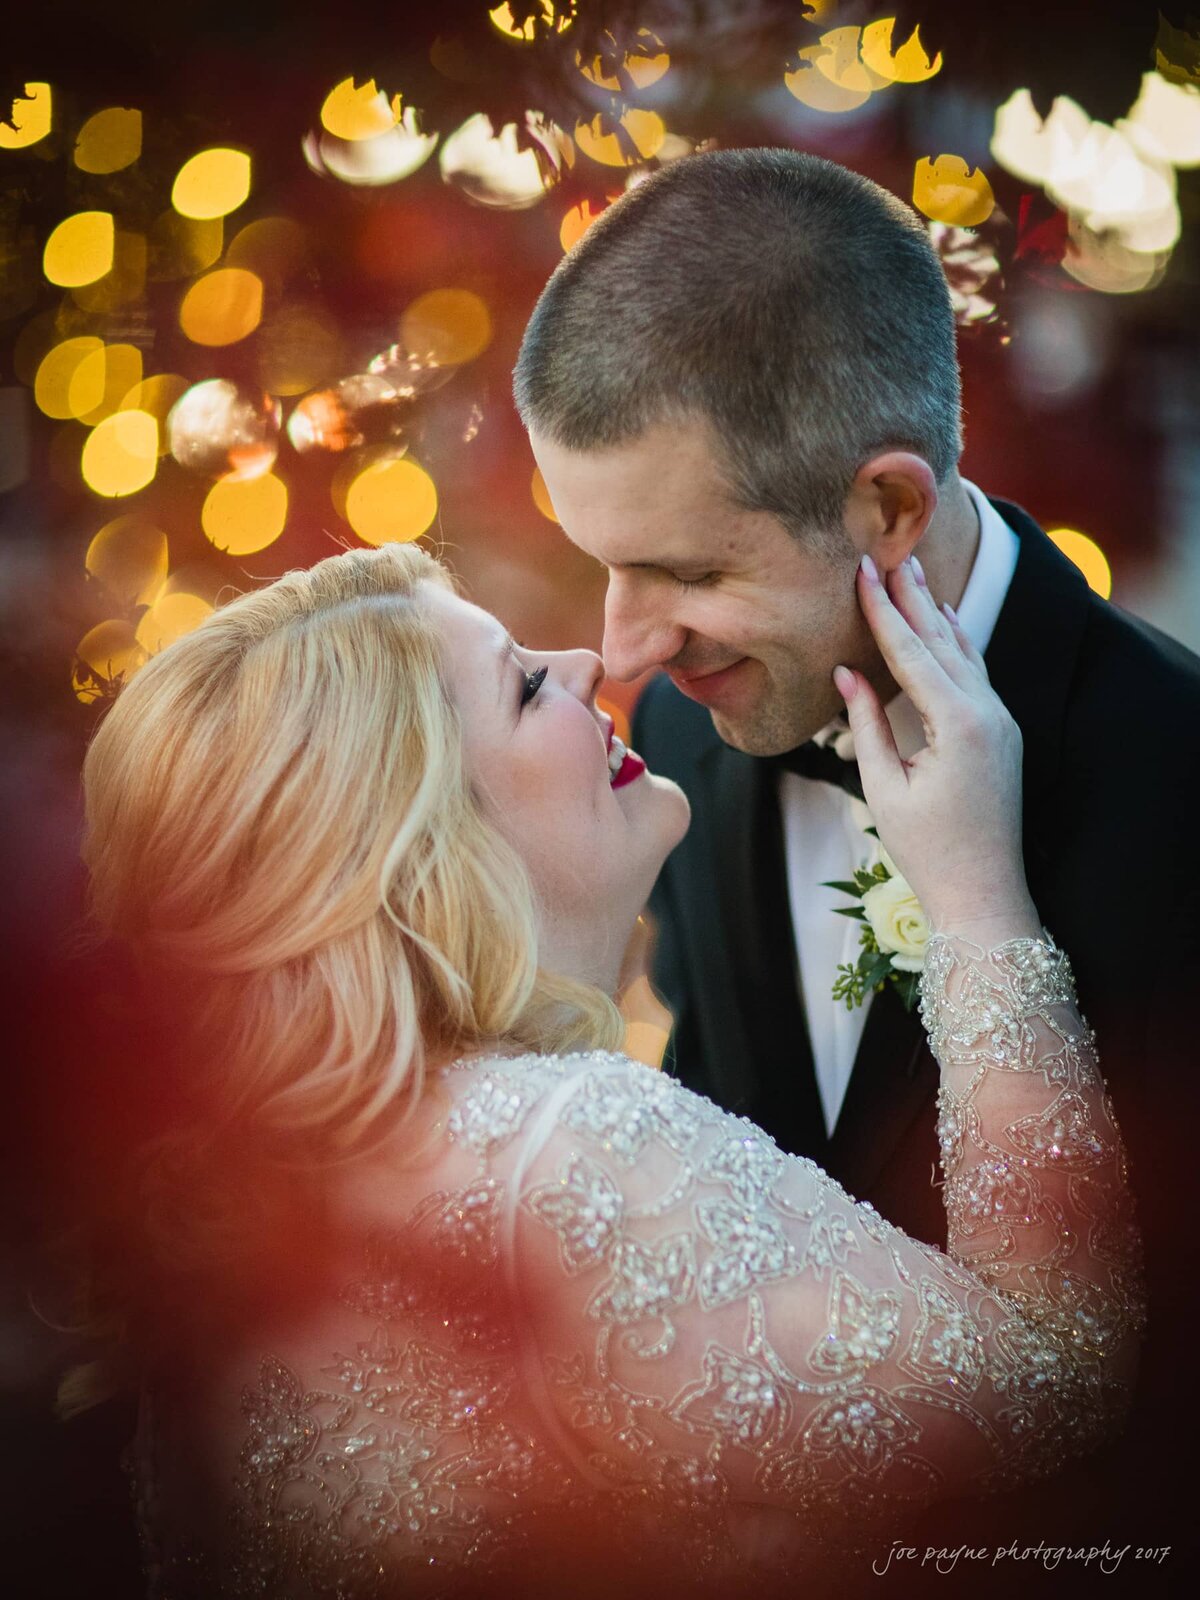 A bride touching a groom's face as they smile and are about to kiss.